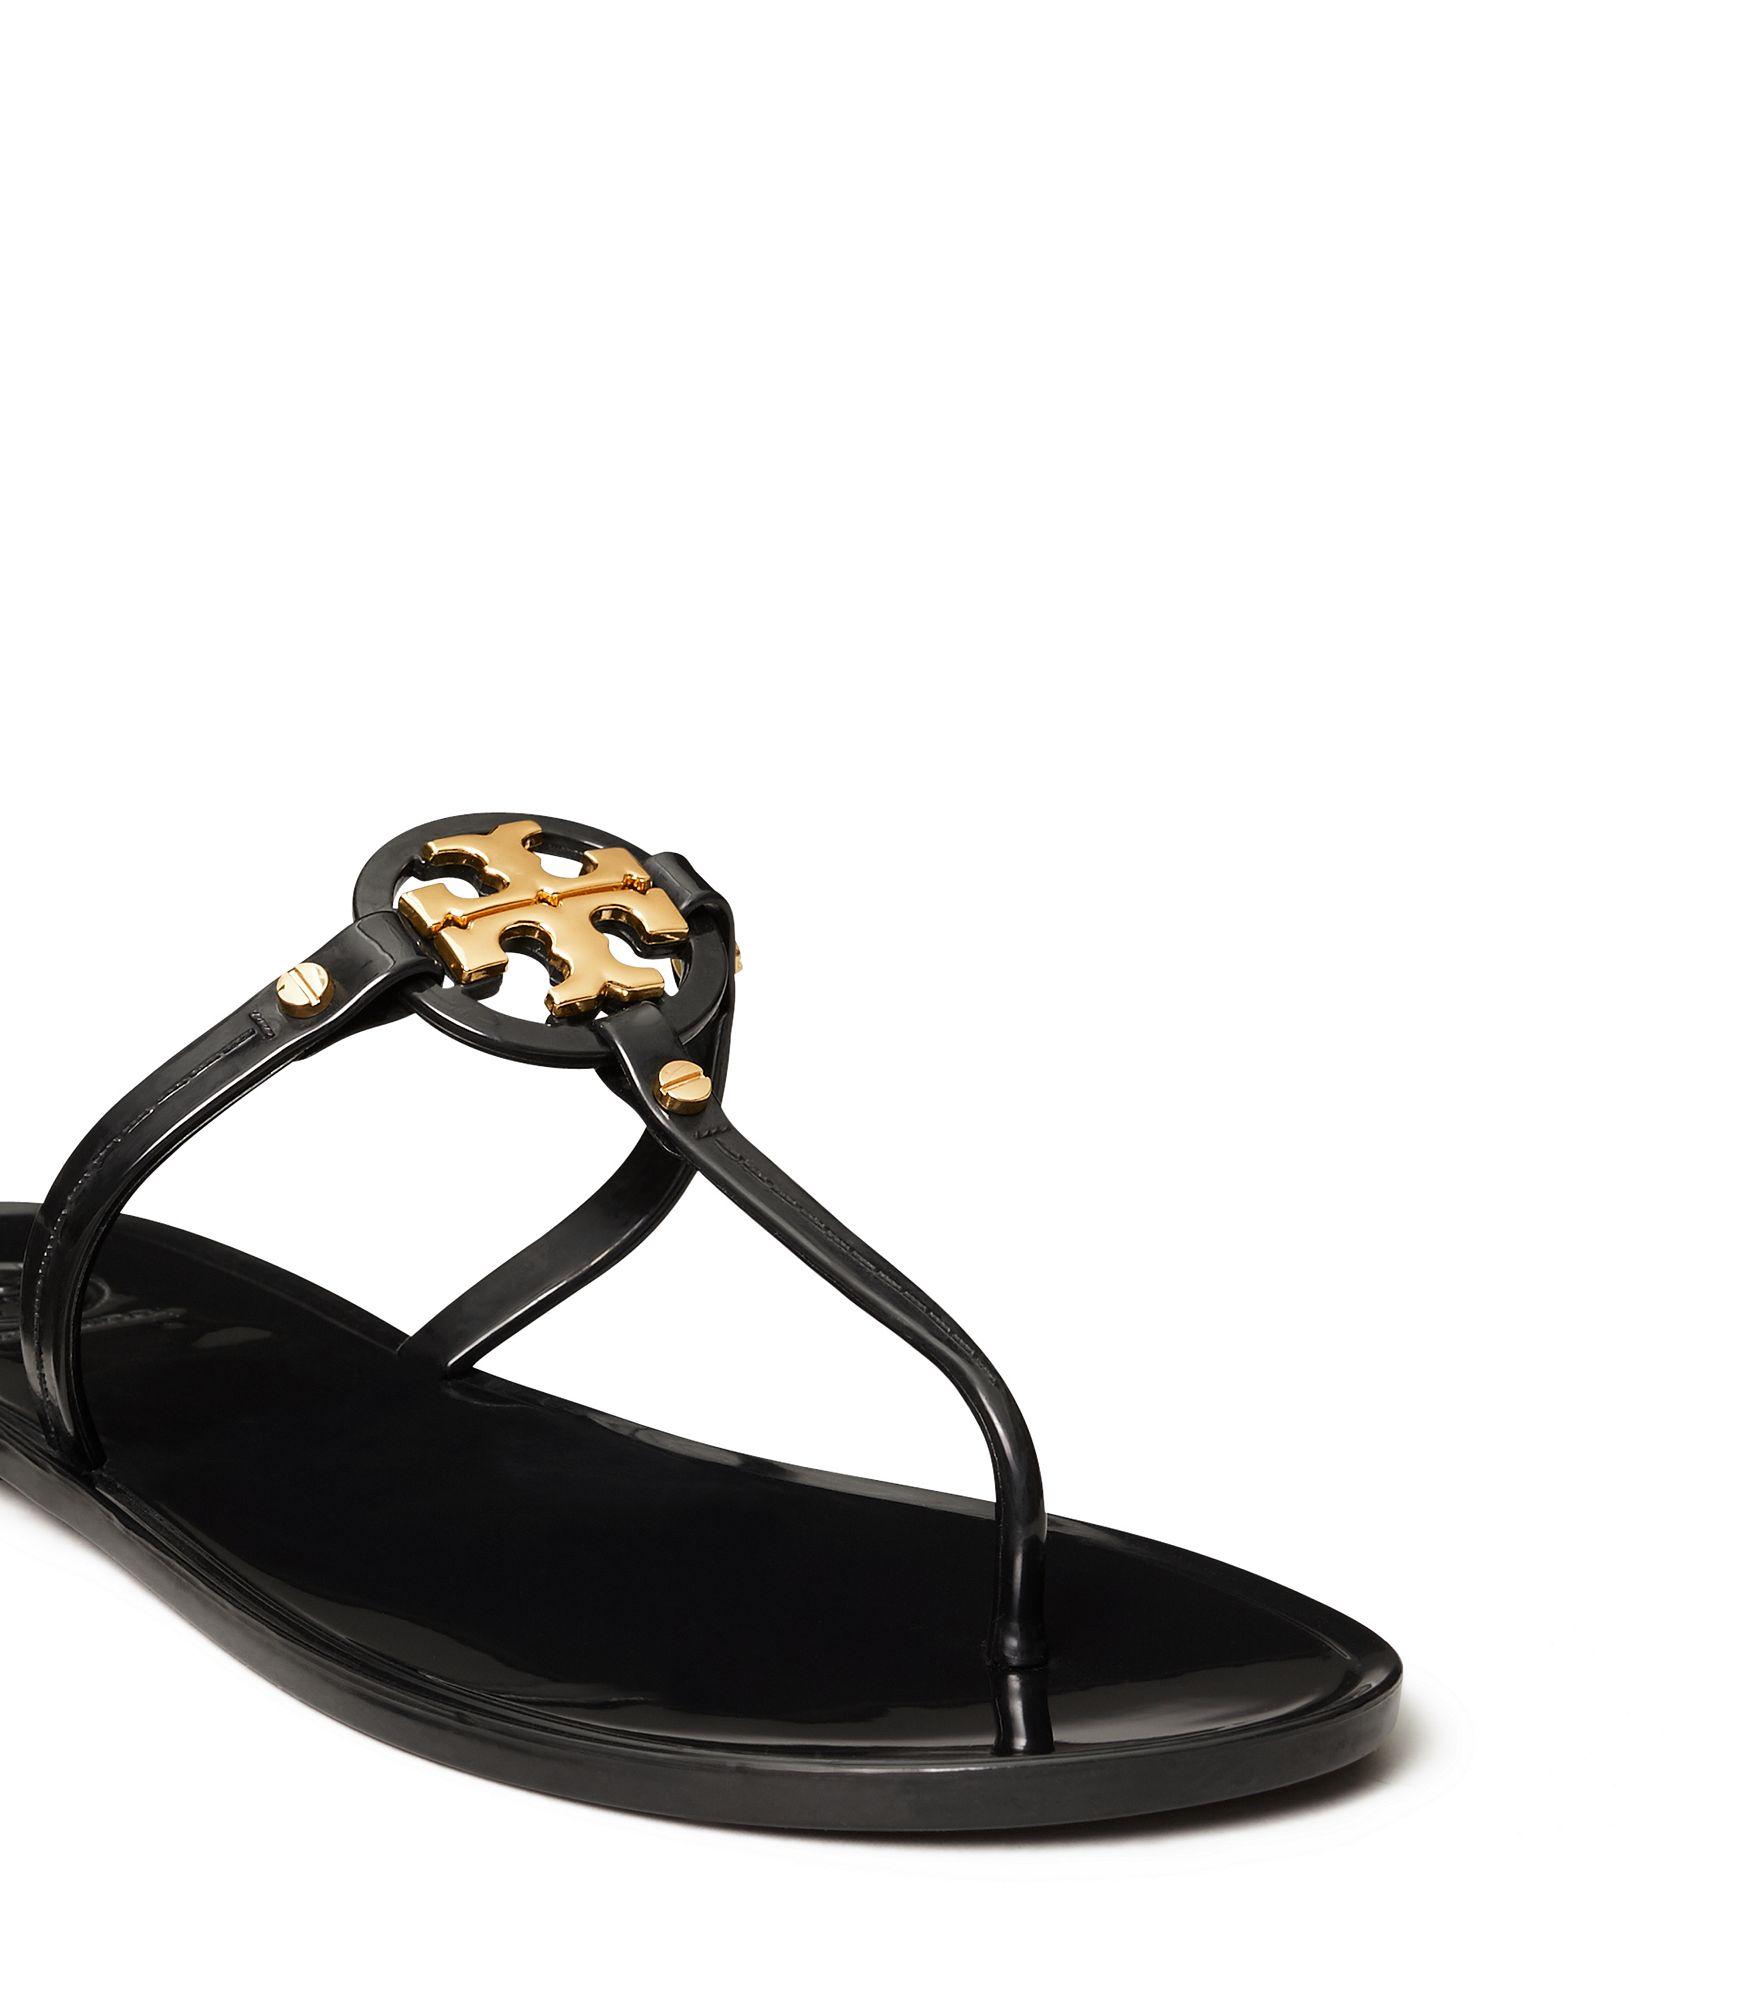 Tory Burch Mini Miller Jelly Thong Sandals in Black - Lyst